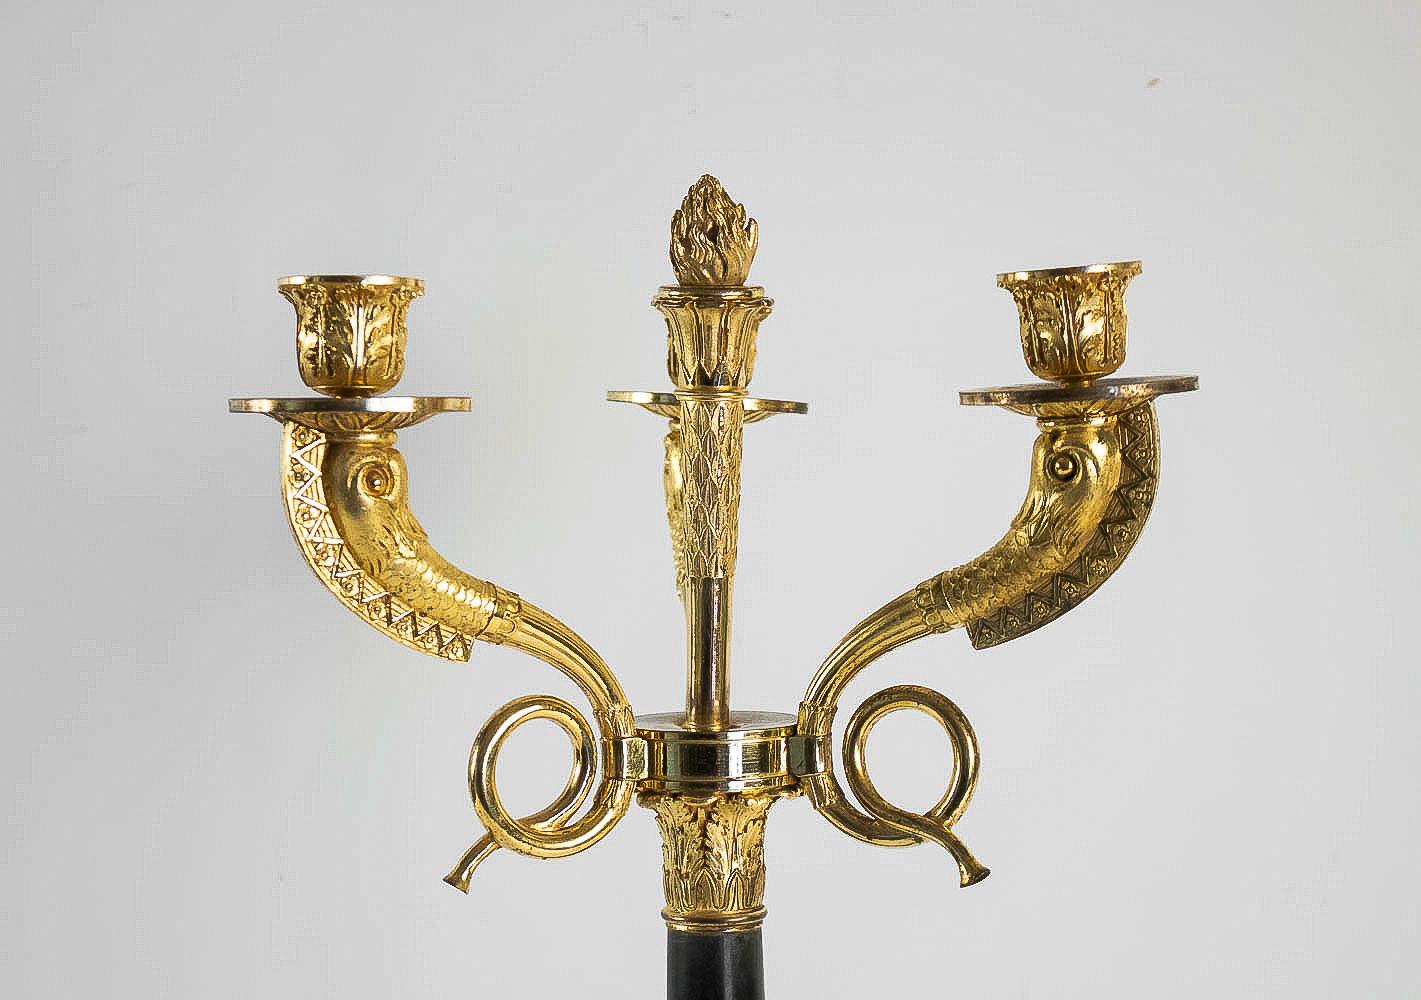 19th Century Large Pair of French Empire or Restauration Period Candelabra, Early 1800s